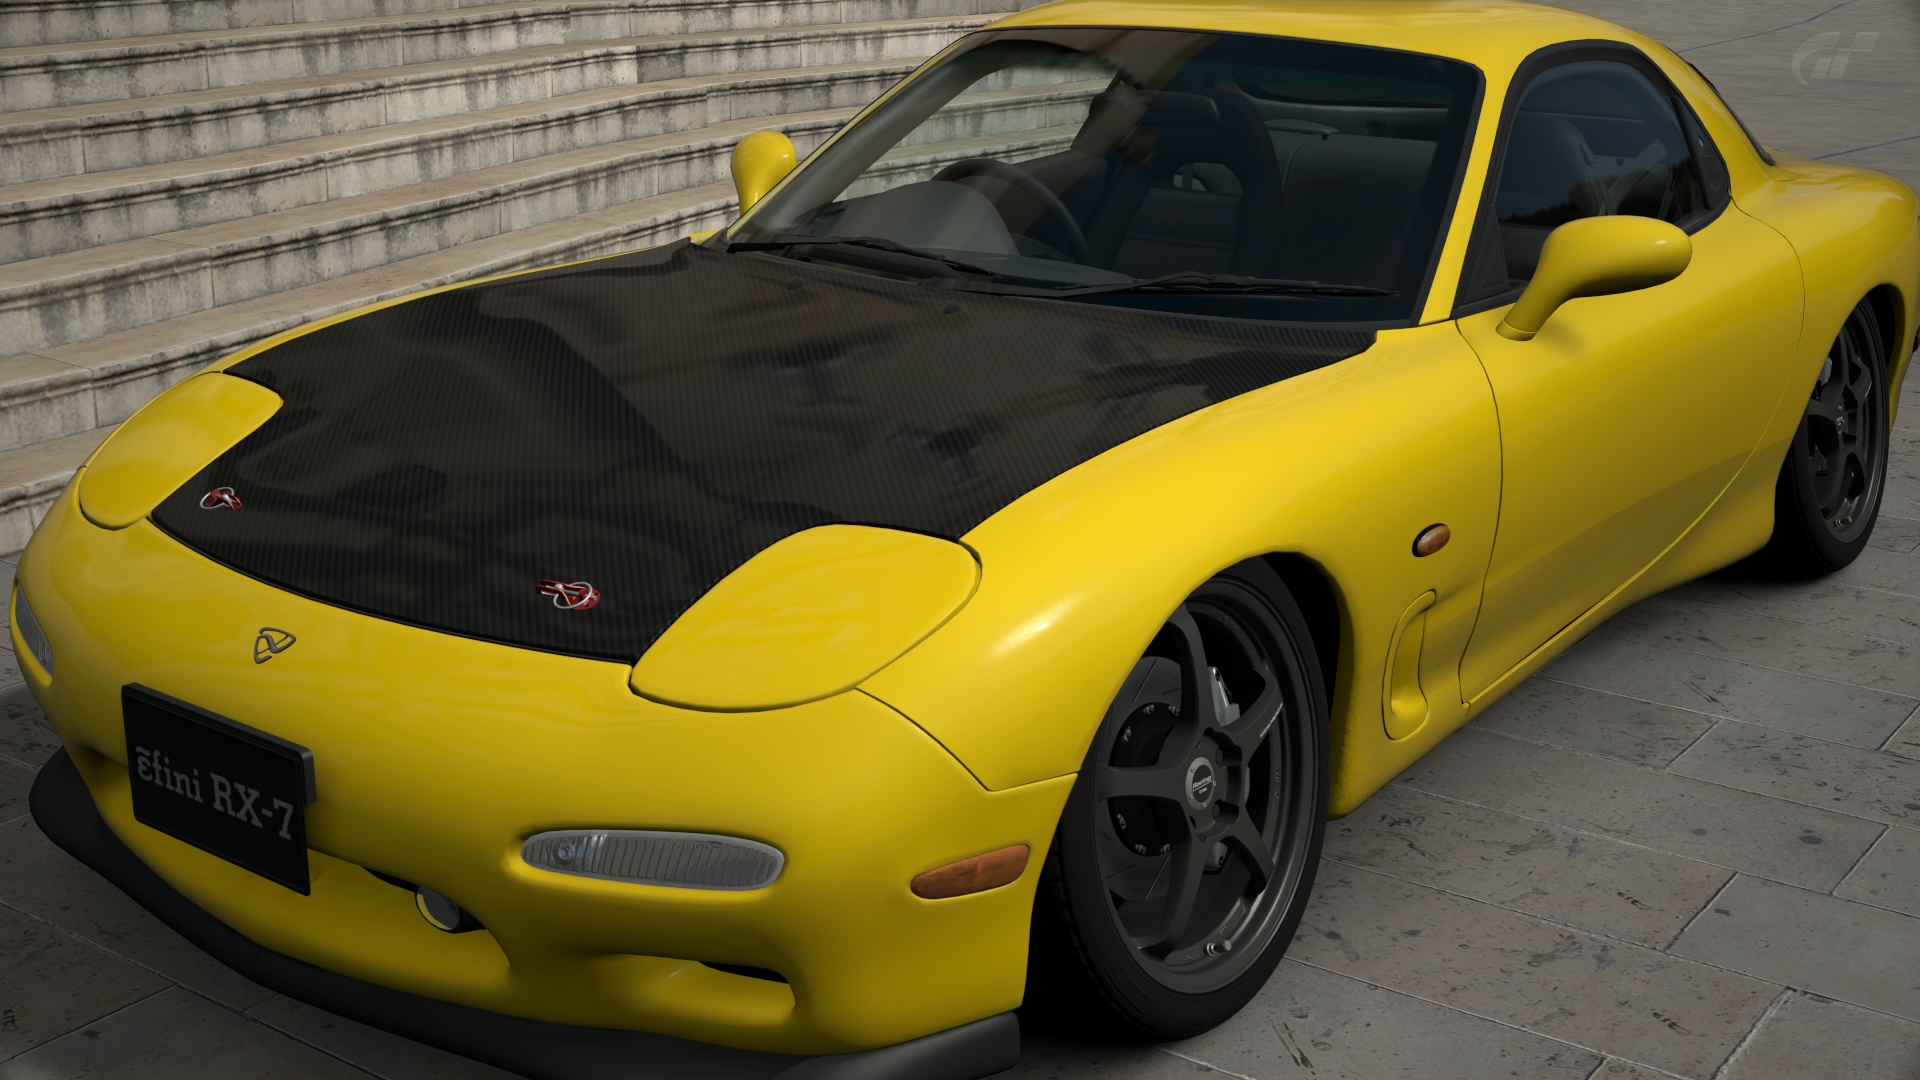 General 1920x1080 Mazda Mazda RX-7 Japanese cars tuning stance (cars) Gran Turismo Gran Turismo 6 pop-up headlights video games car vehicle frontal view